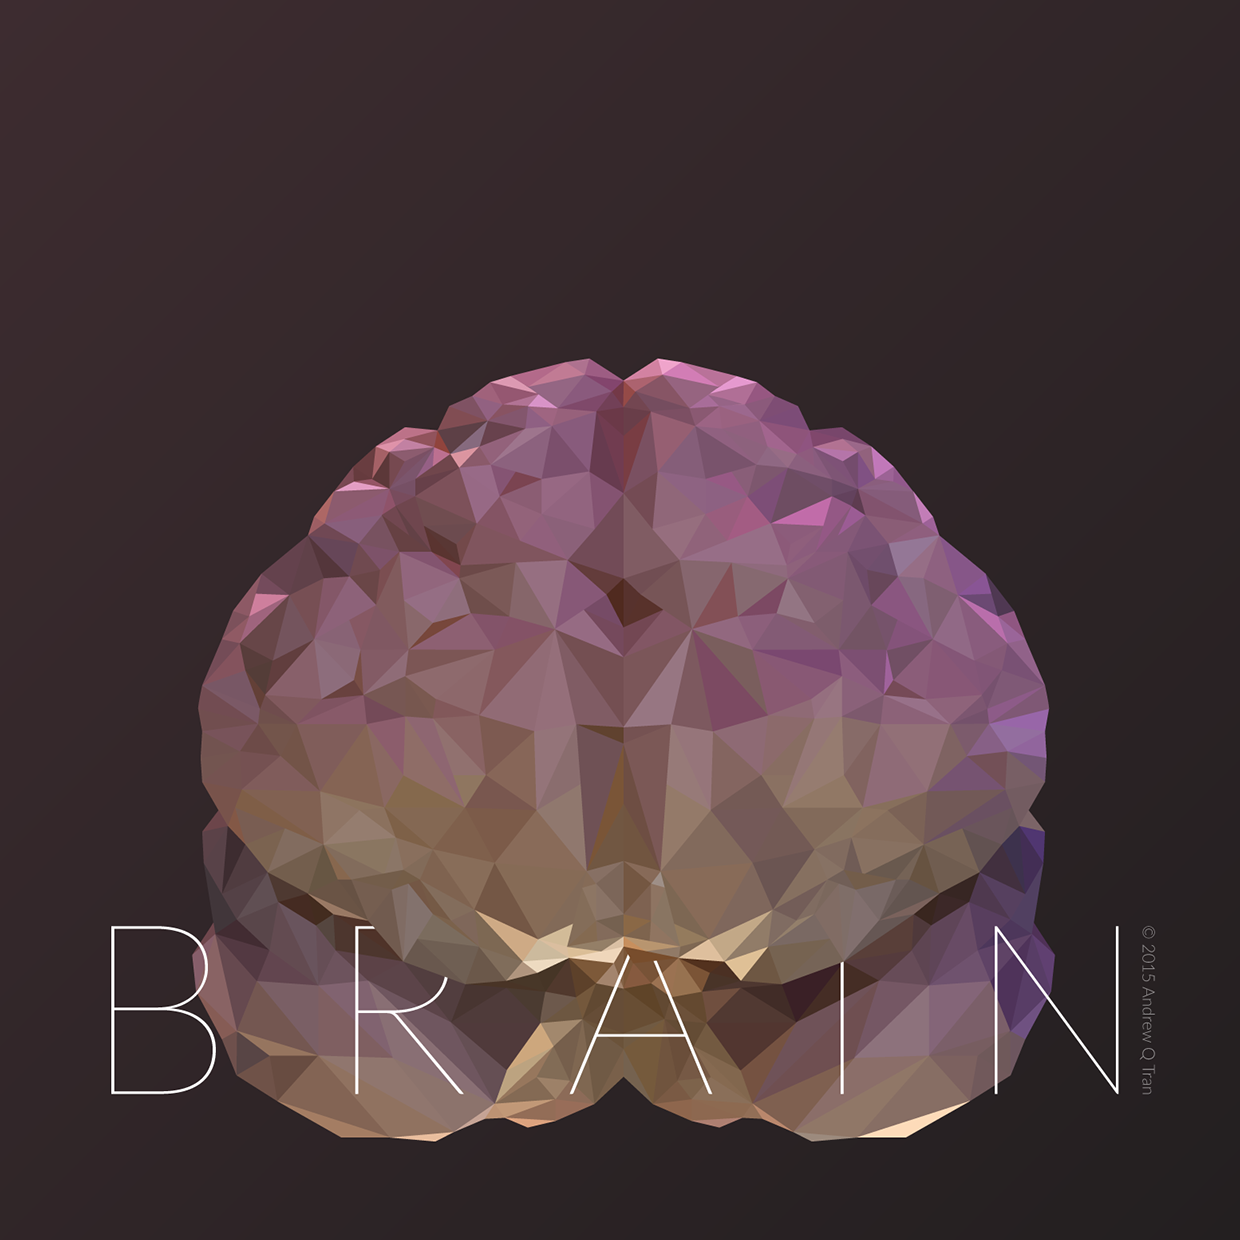 Low-poly illustration of a brain